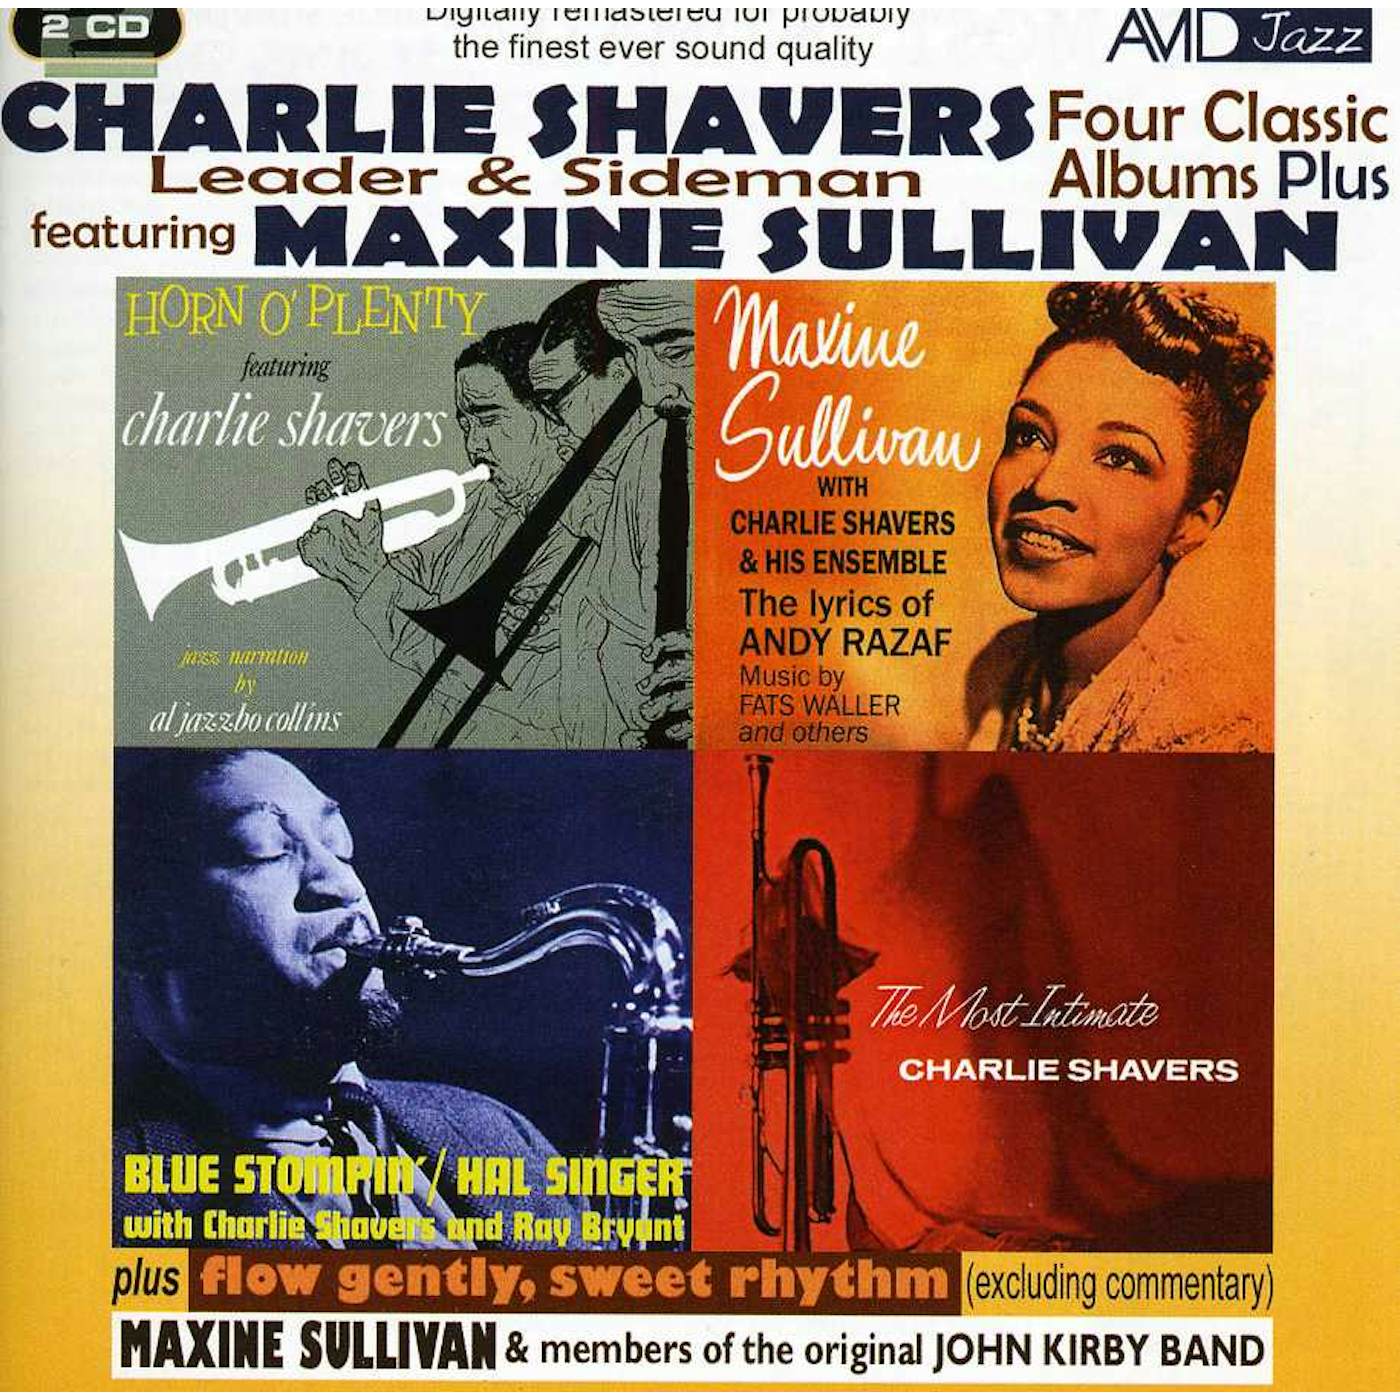 Charlie Shavers 4 CLASSIC ALBUMS CD